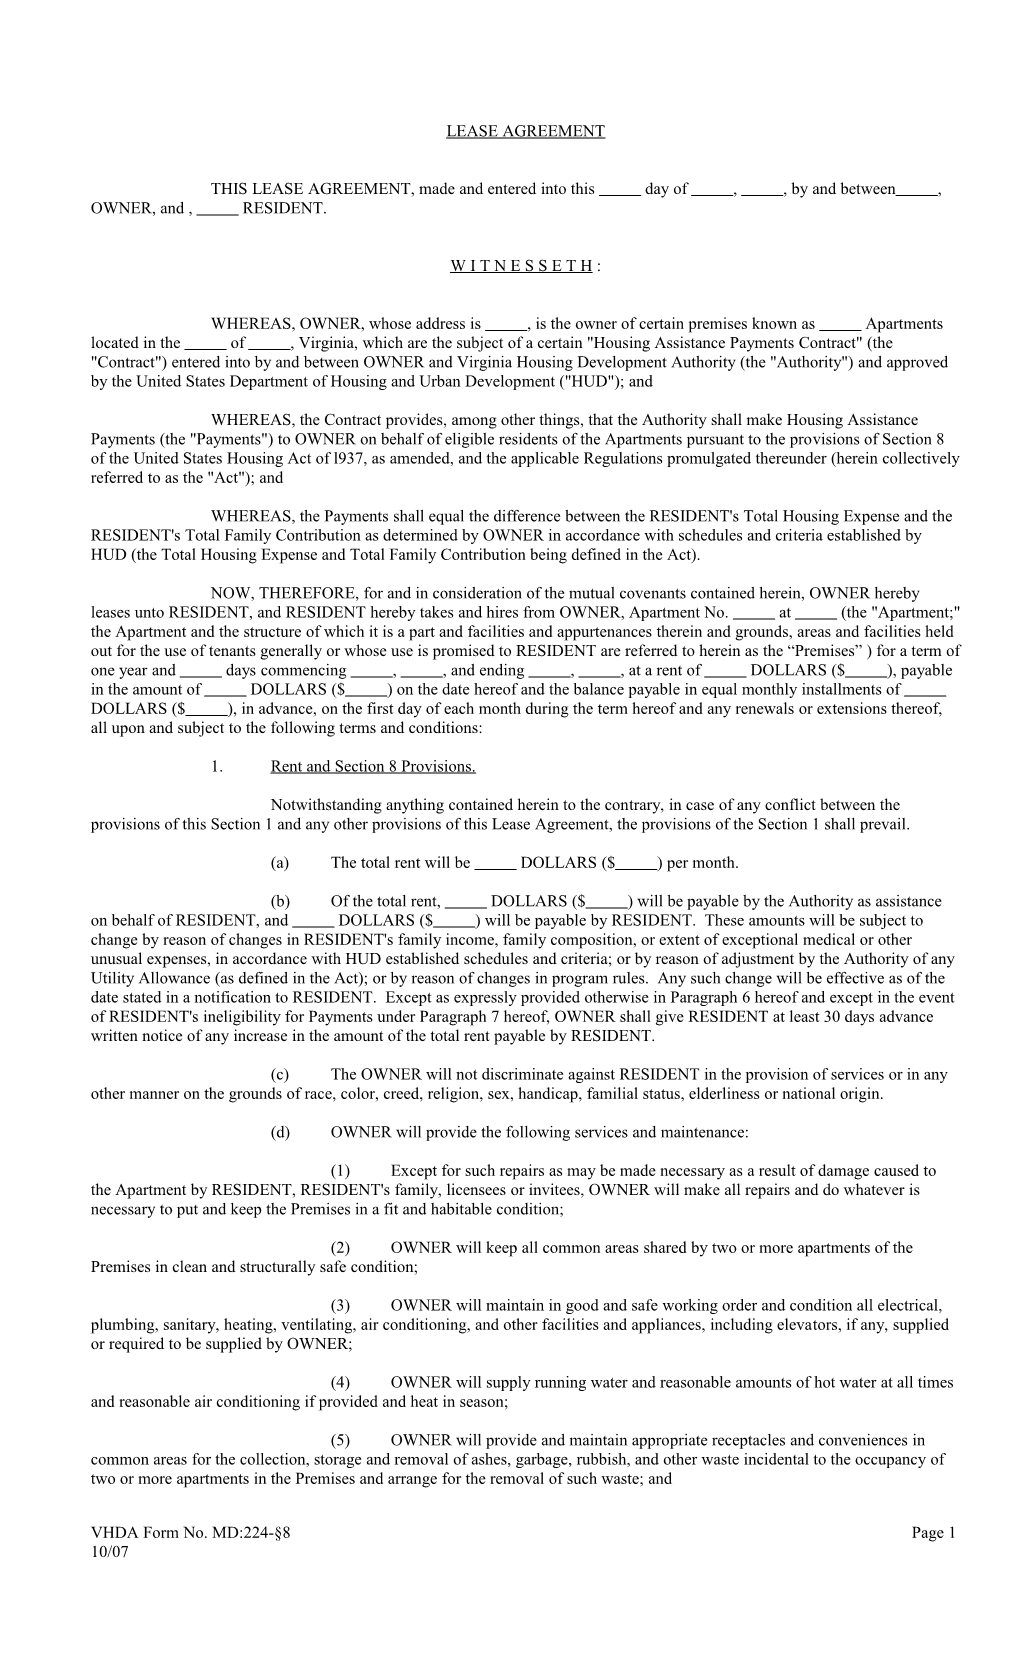 Lease Agreement (MD:224)